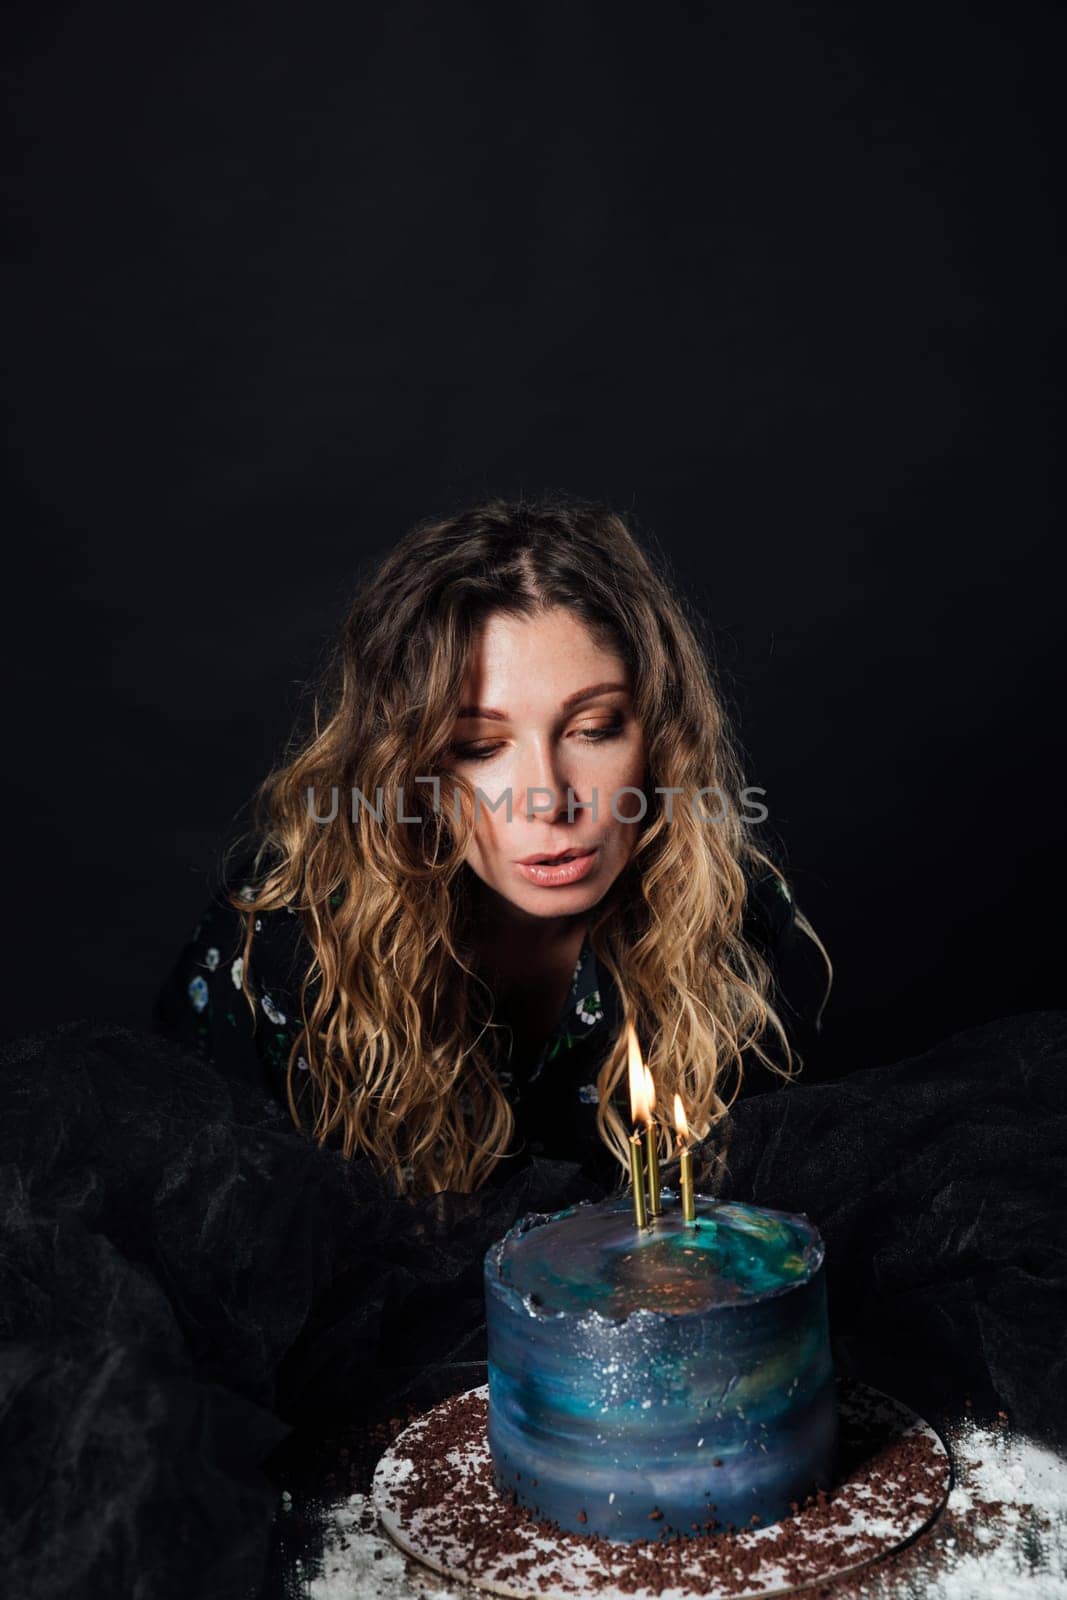 a birthday woman blows candles on cake dessert delicious sweets